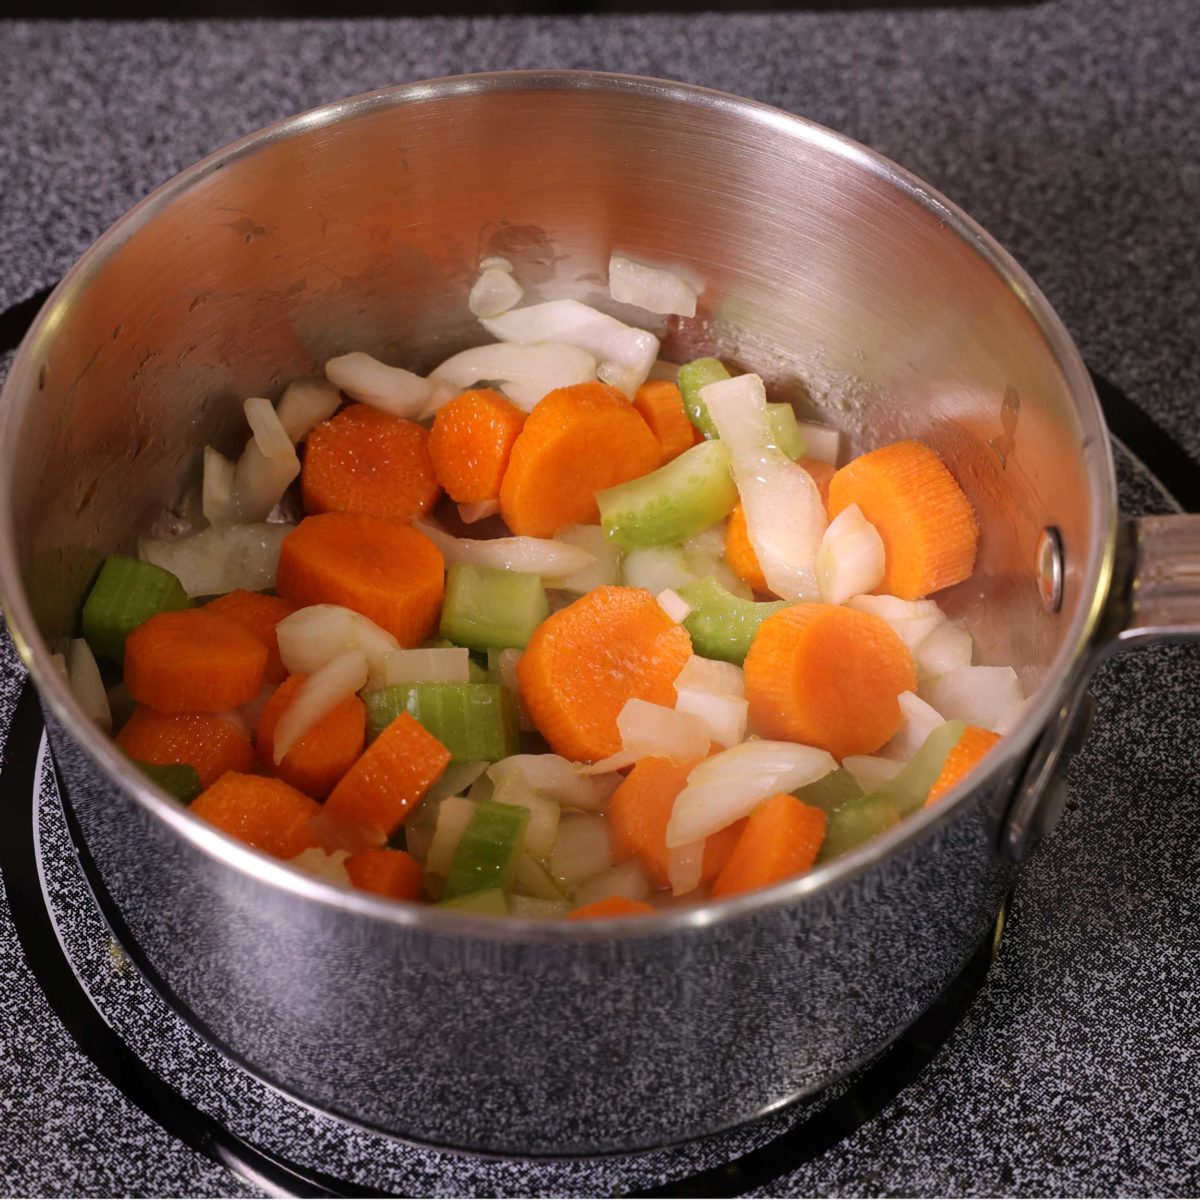 onions, carrots, and celery in a small saucepan.